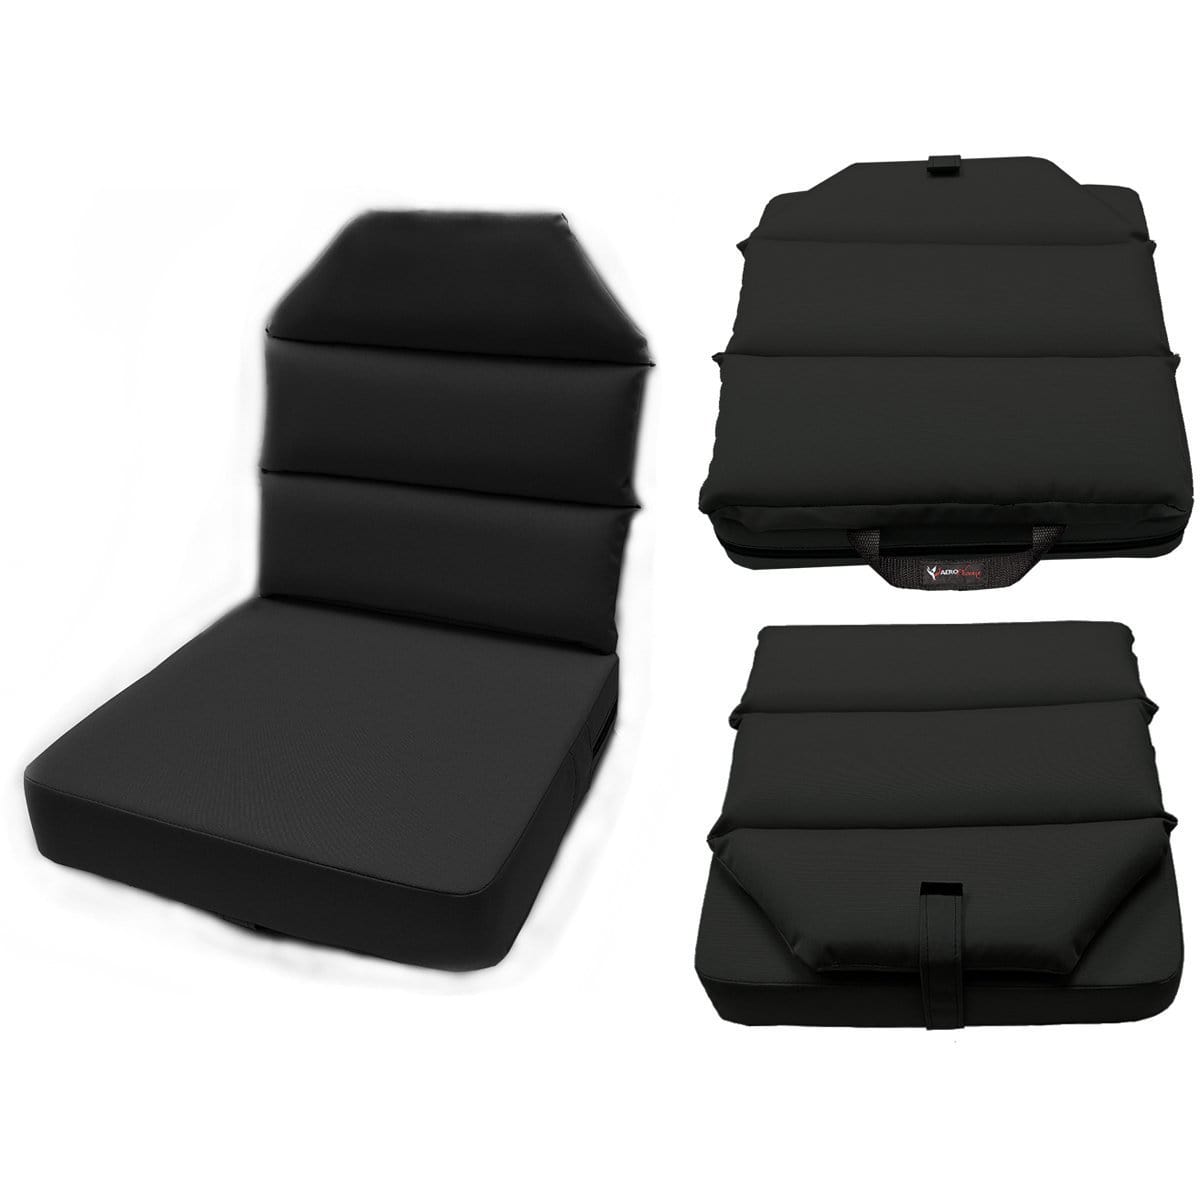 Best Airplane Seat Cushions & Stools for Pilots 